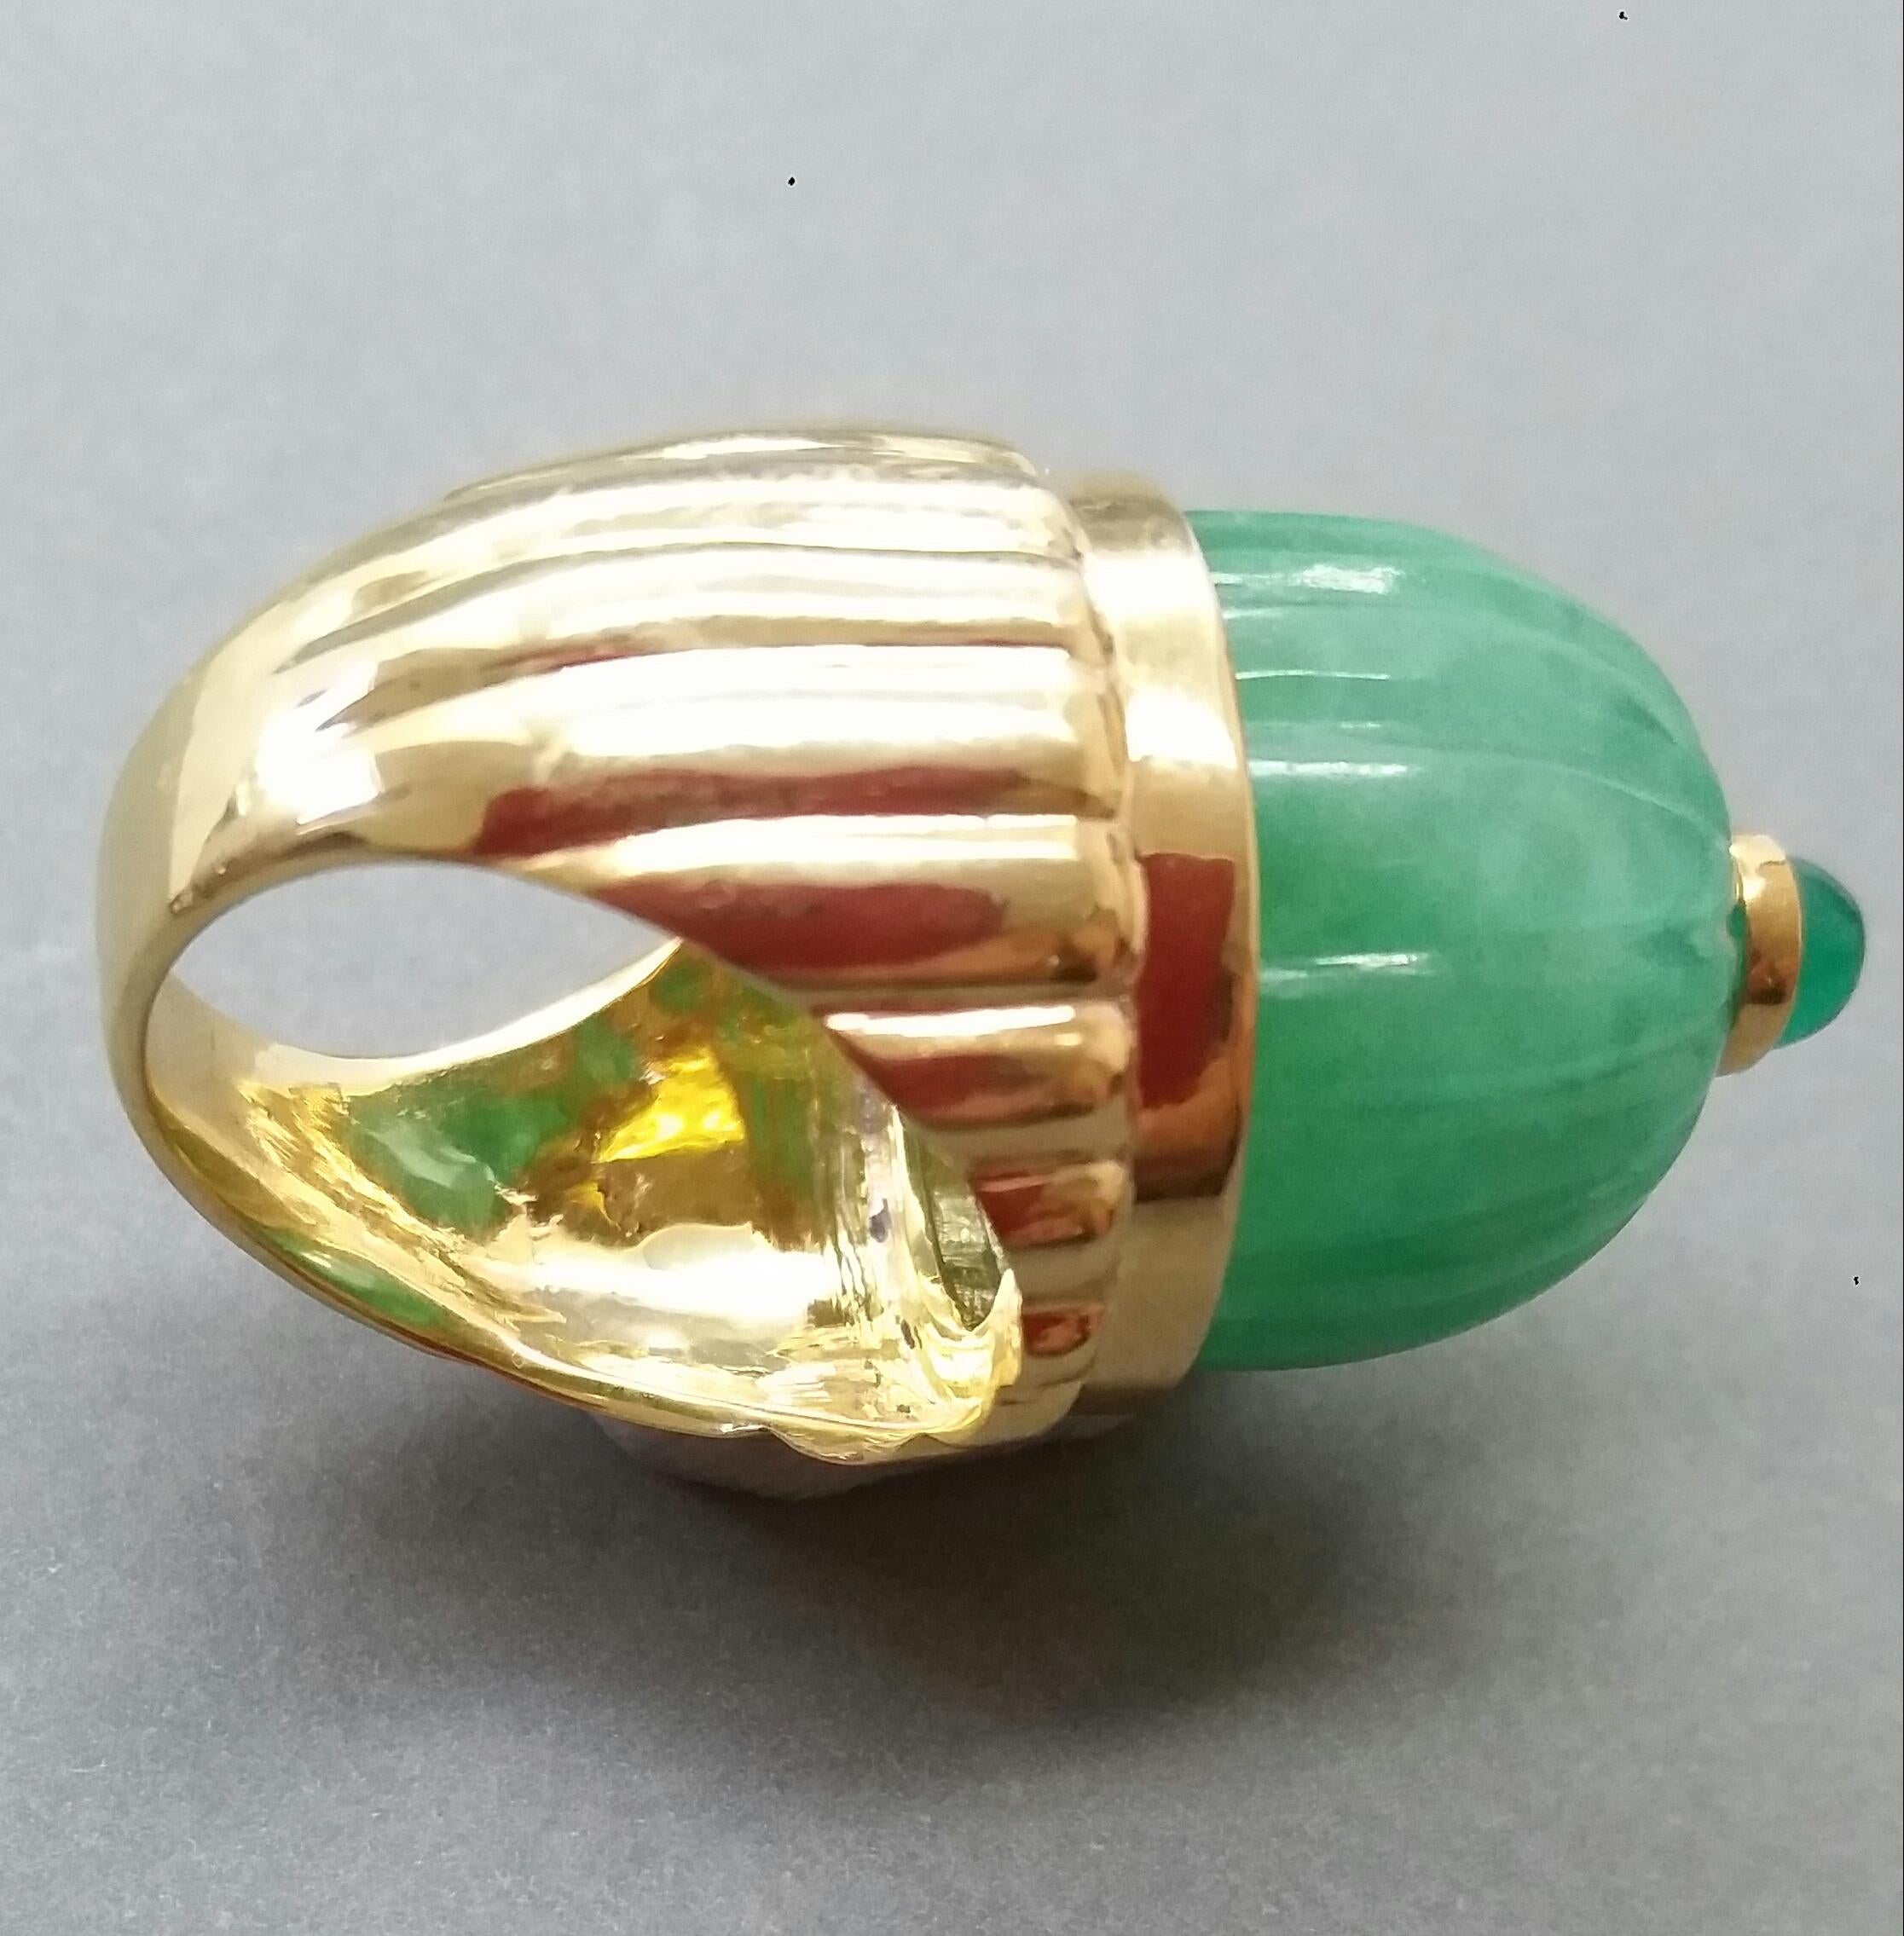 Engraved Burma Jade Cabochon Emerald Cabochon 14 Karat Solid Yellow Gold Ring In Good Condition For Sale In Bangkok, TH